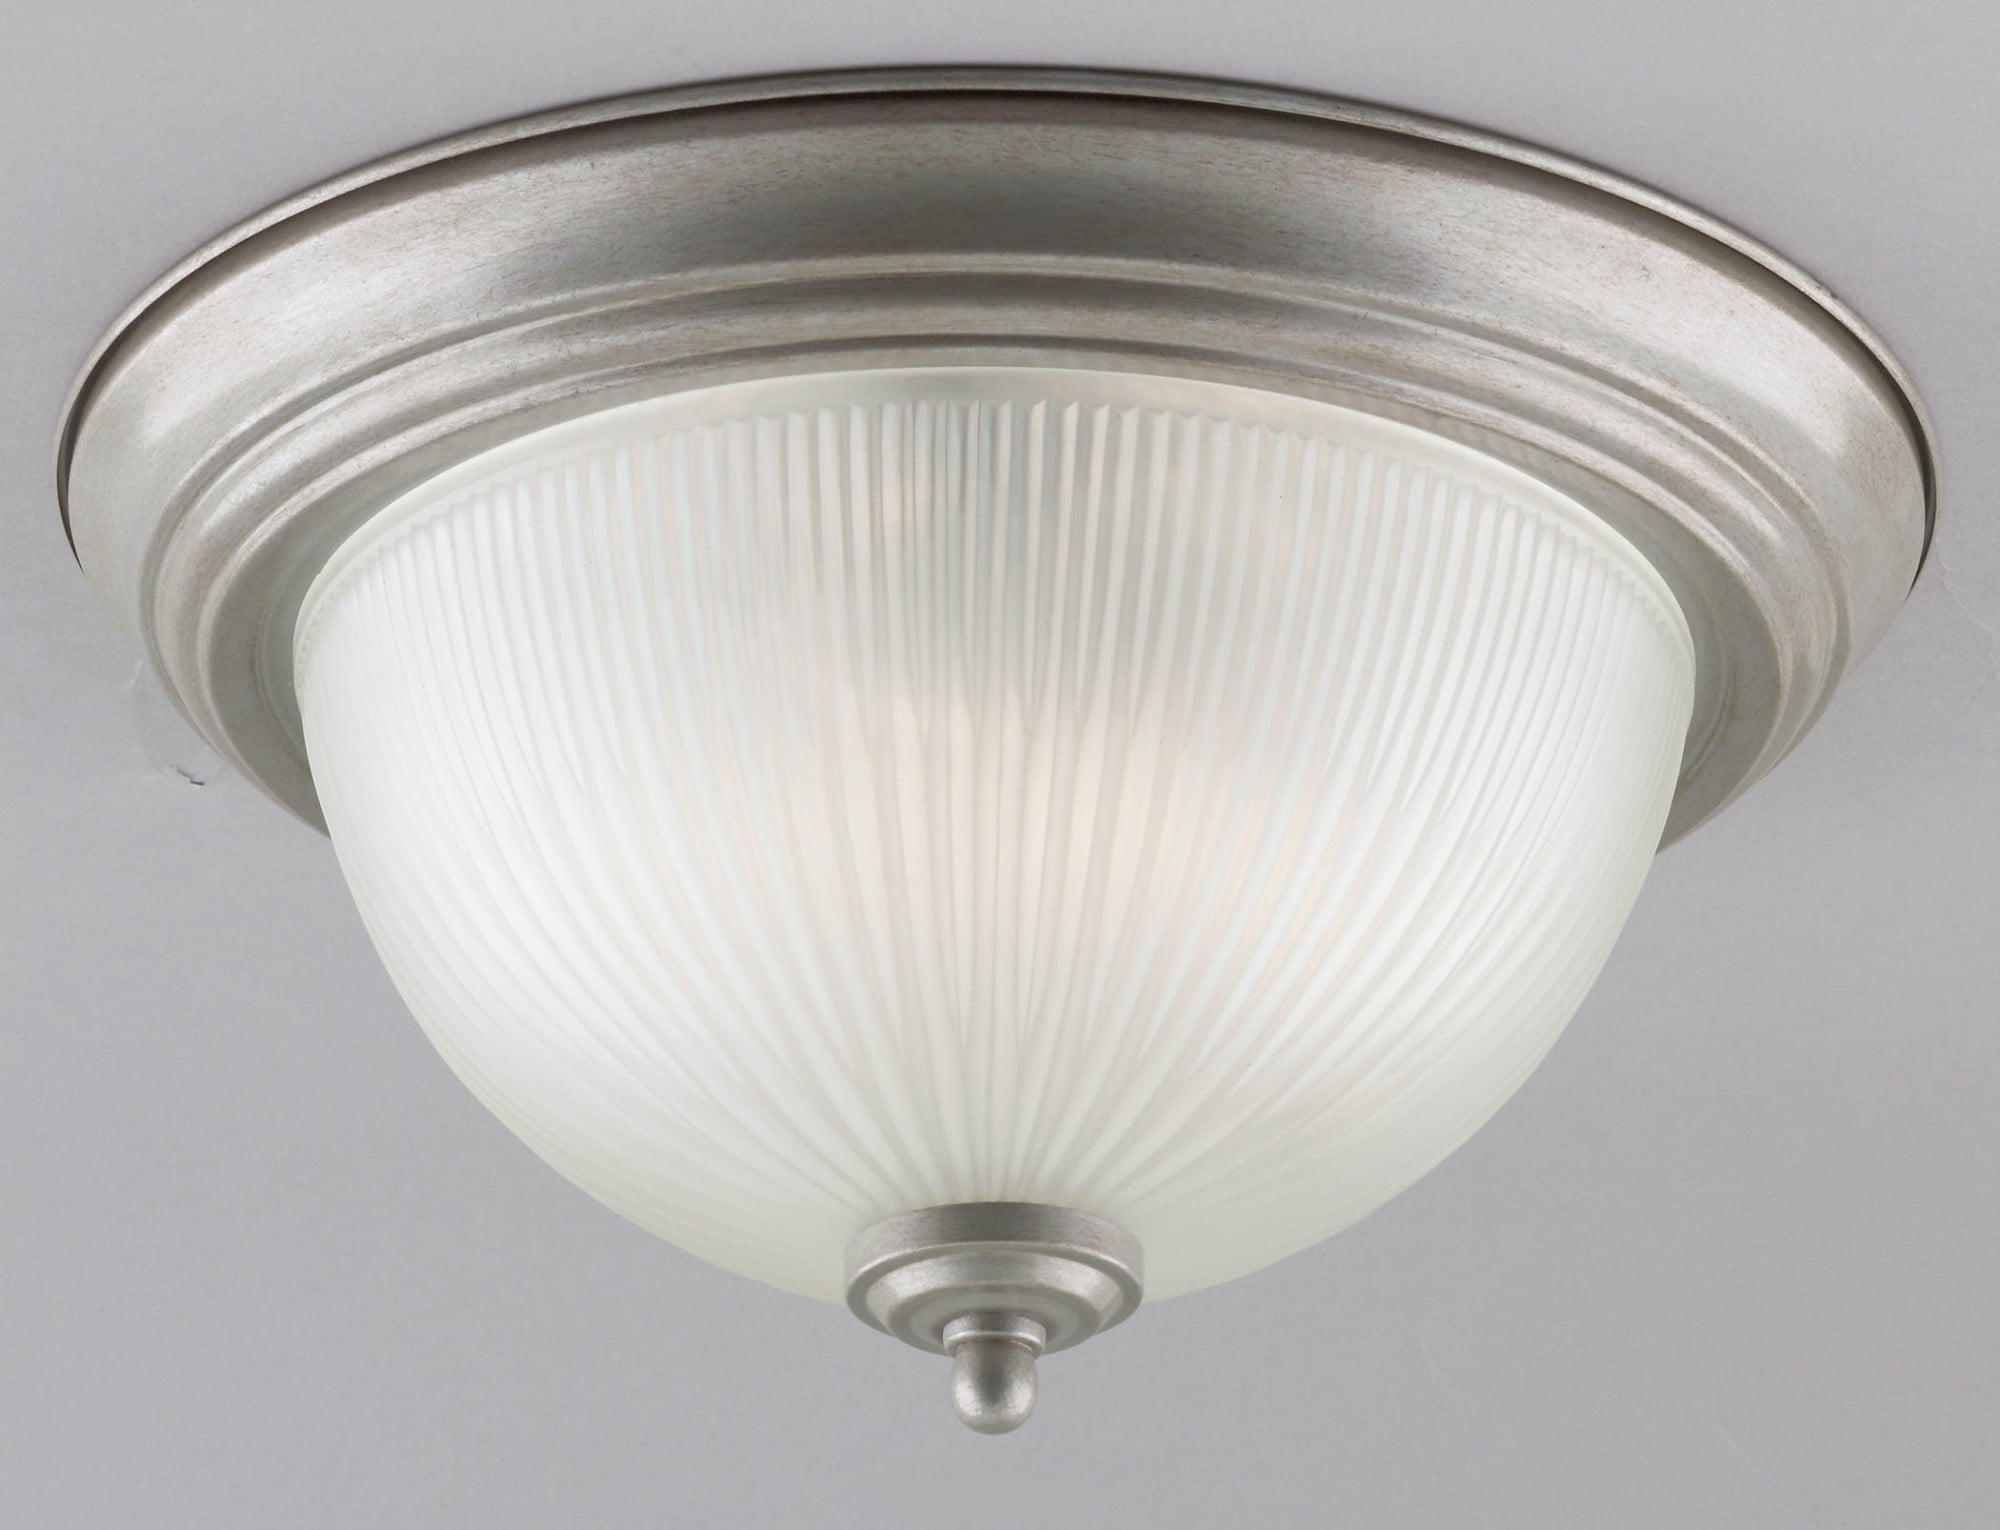 kitchen ceiling dome light